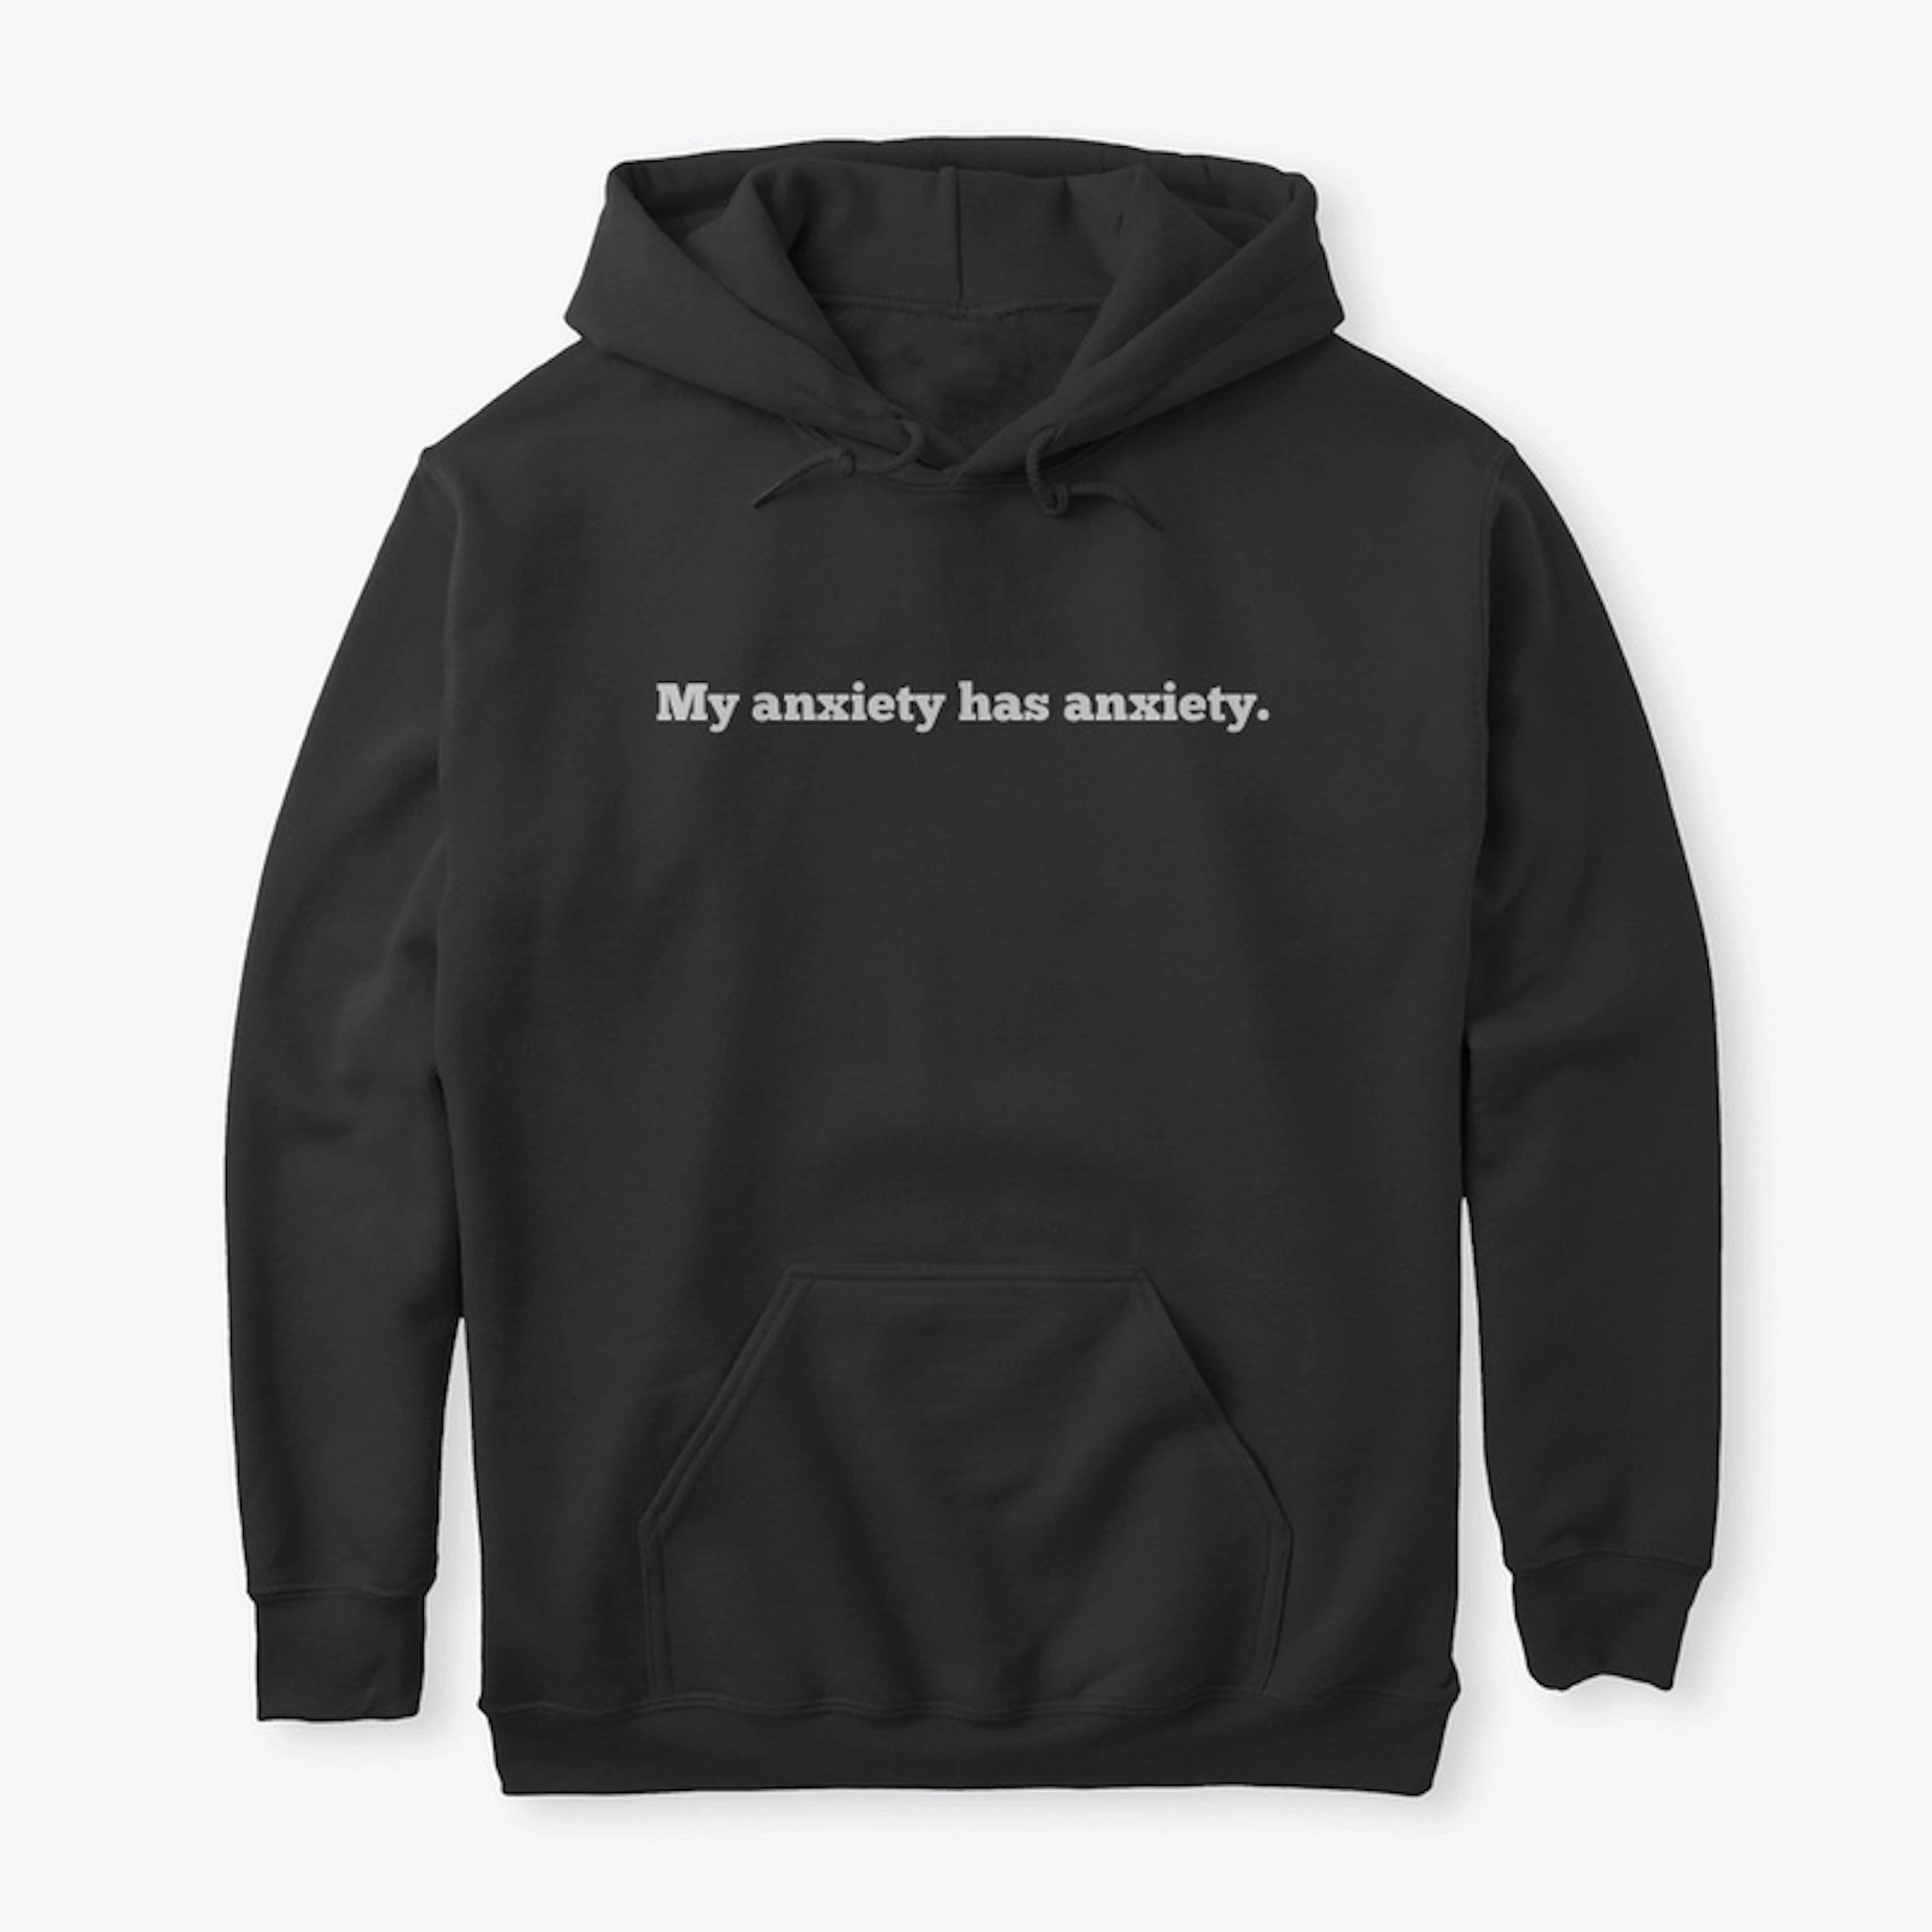 Funny design - My anxiety has anxiety.